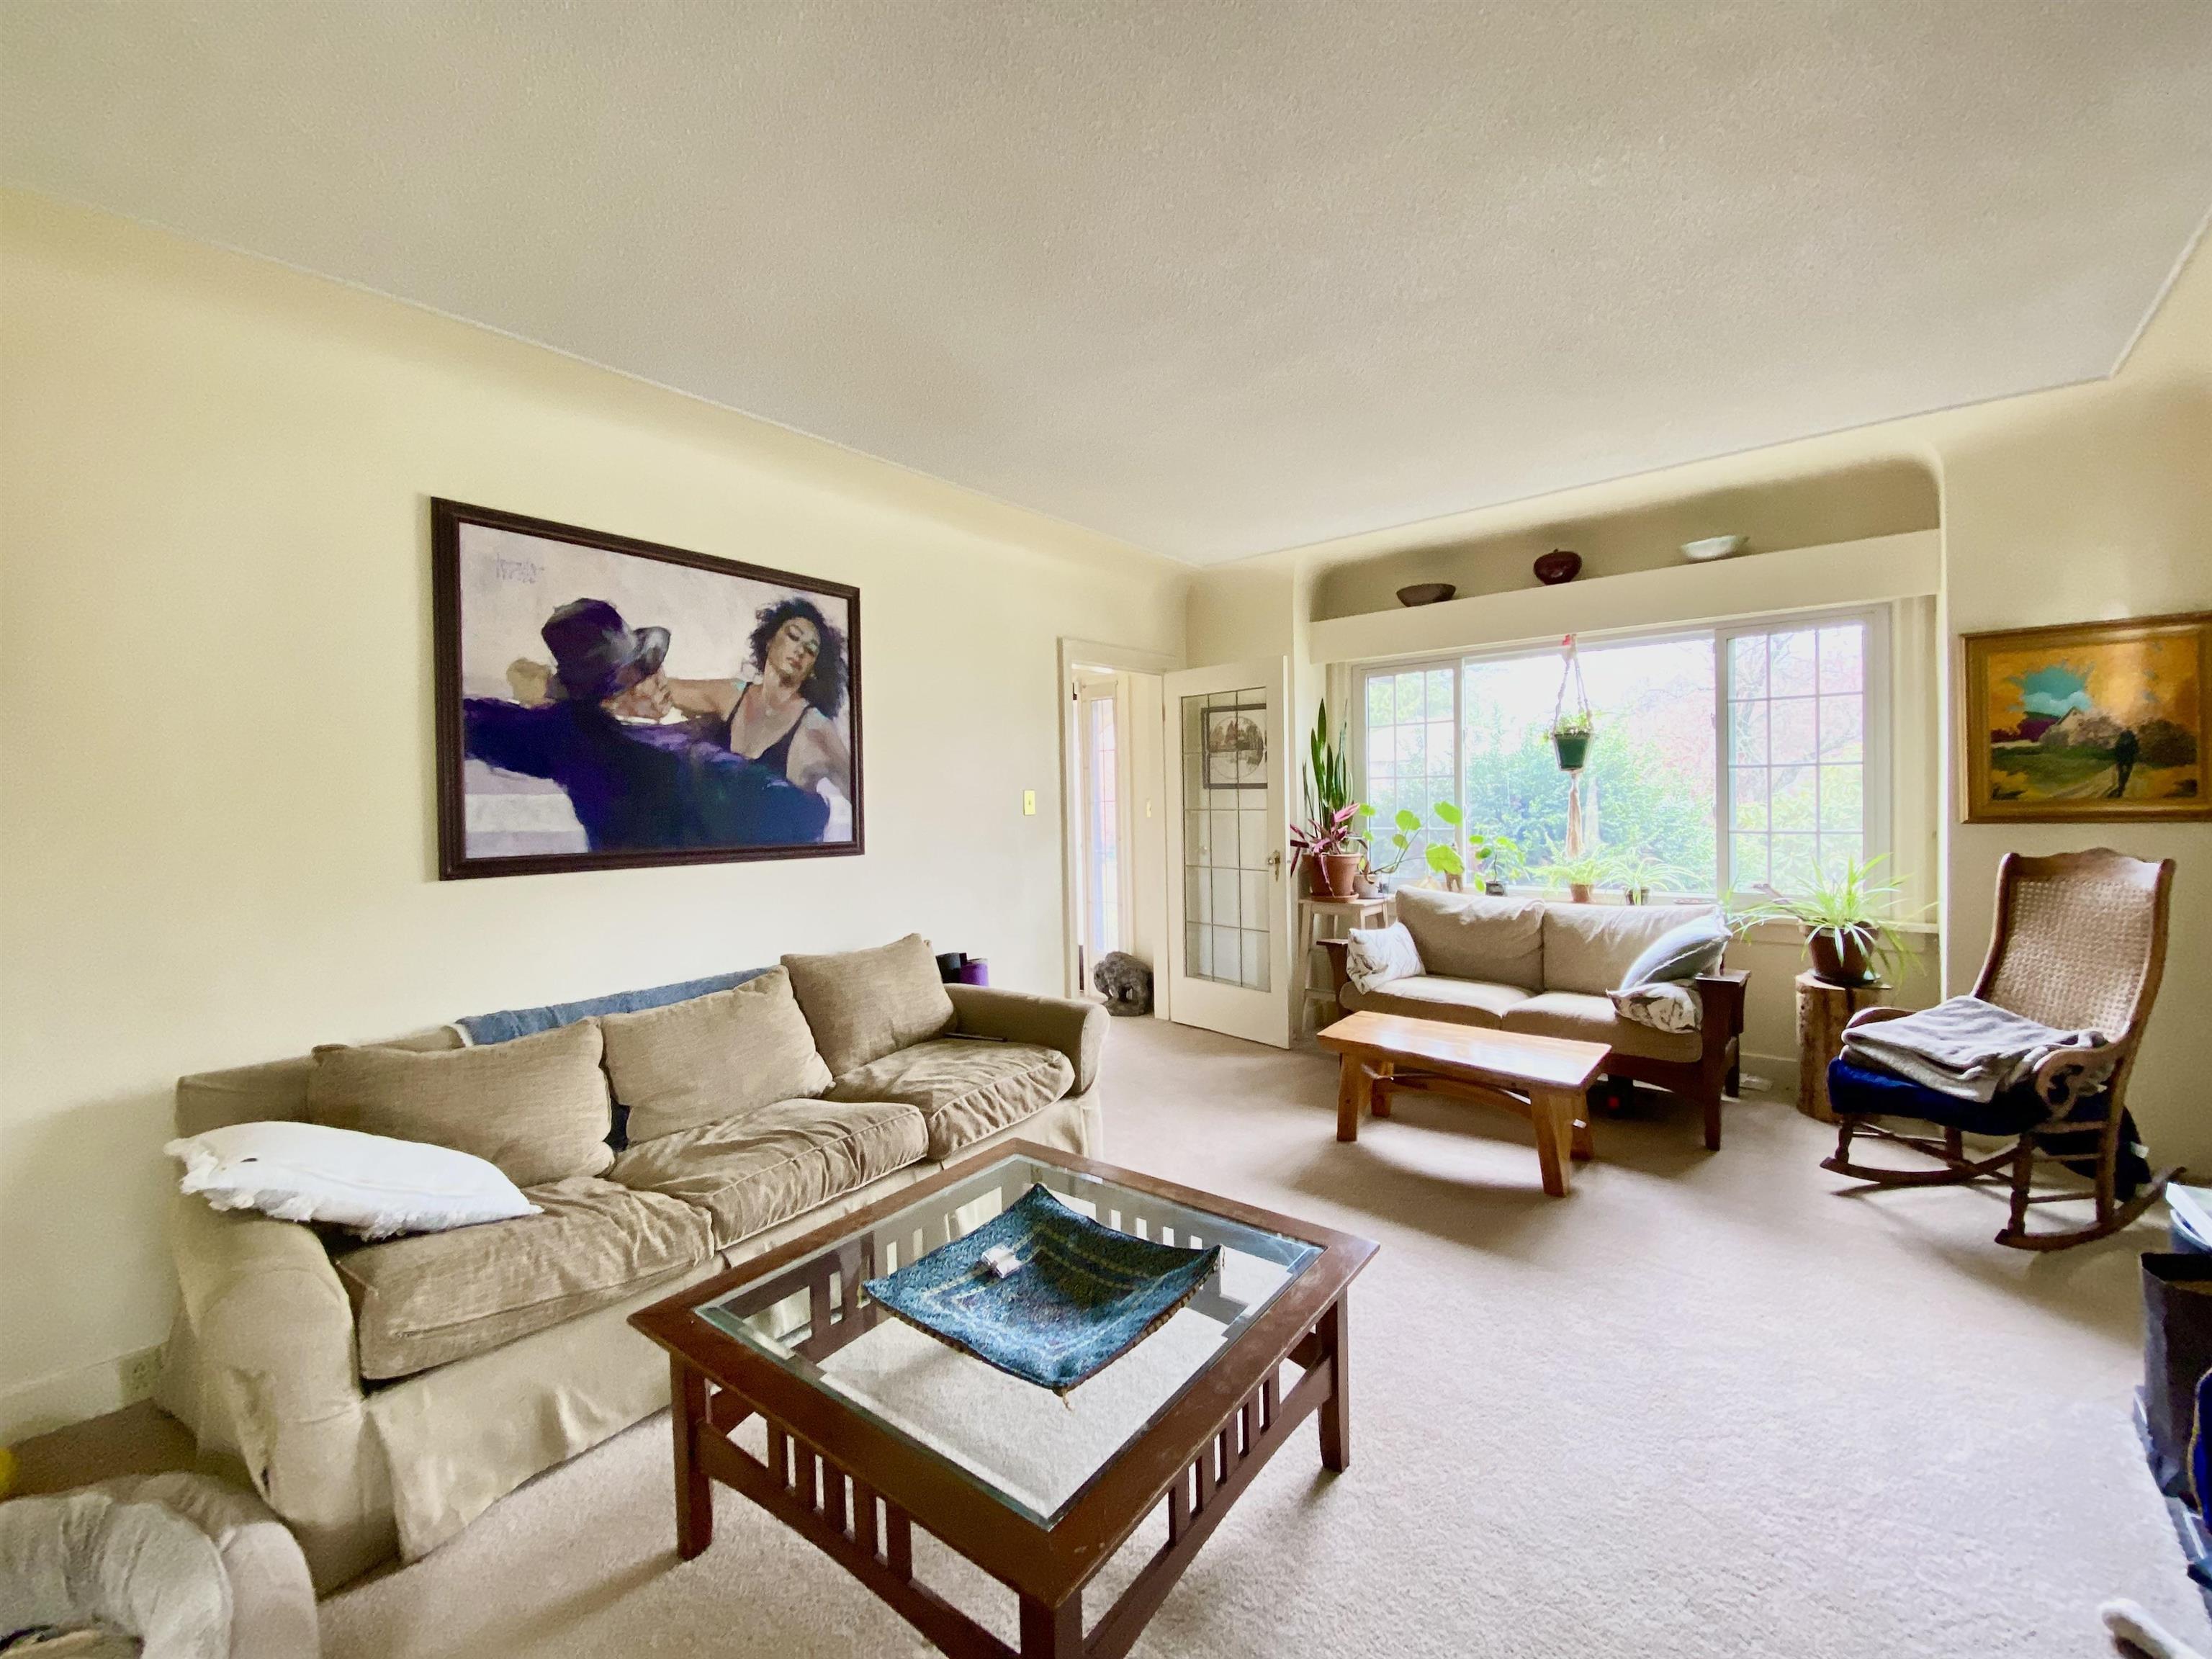 Listing image of 3904 W 21ST AVENUE